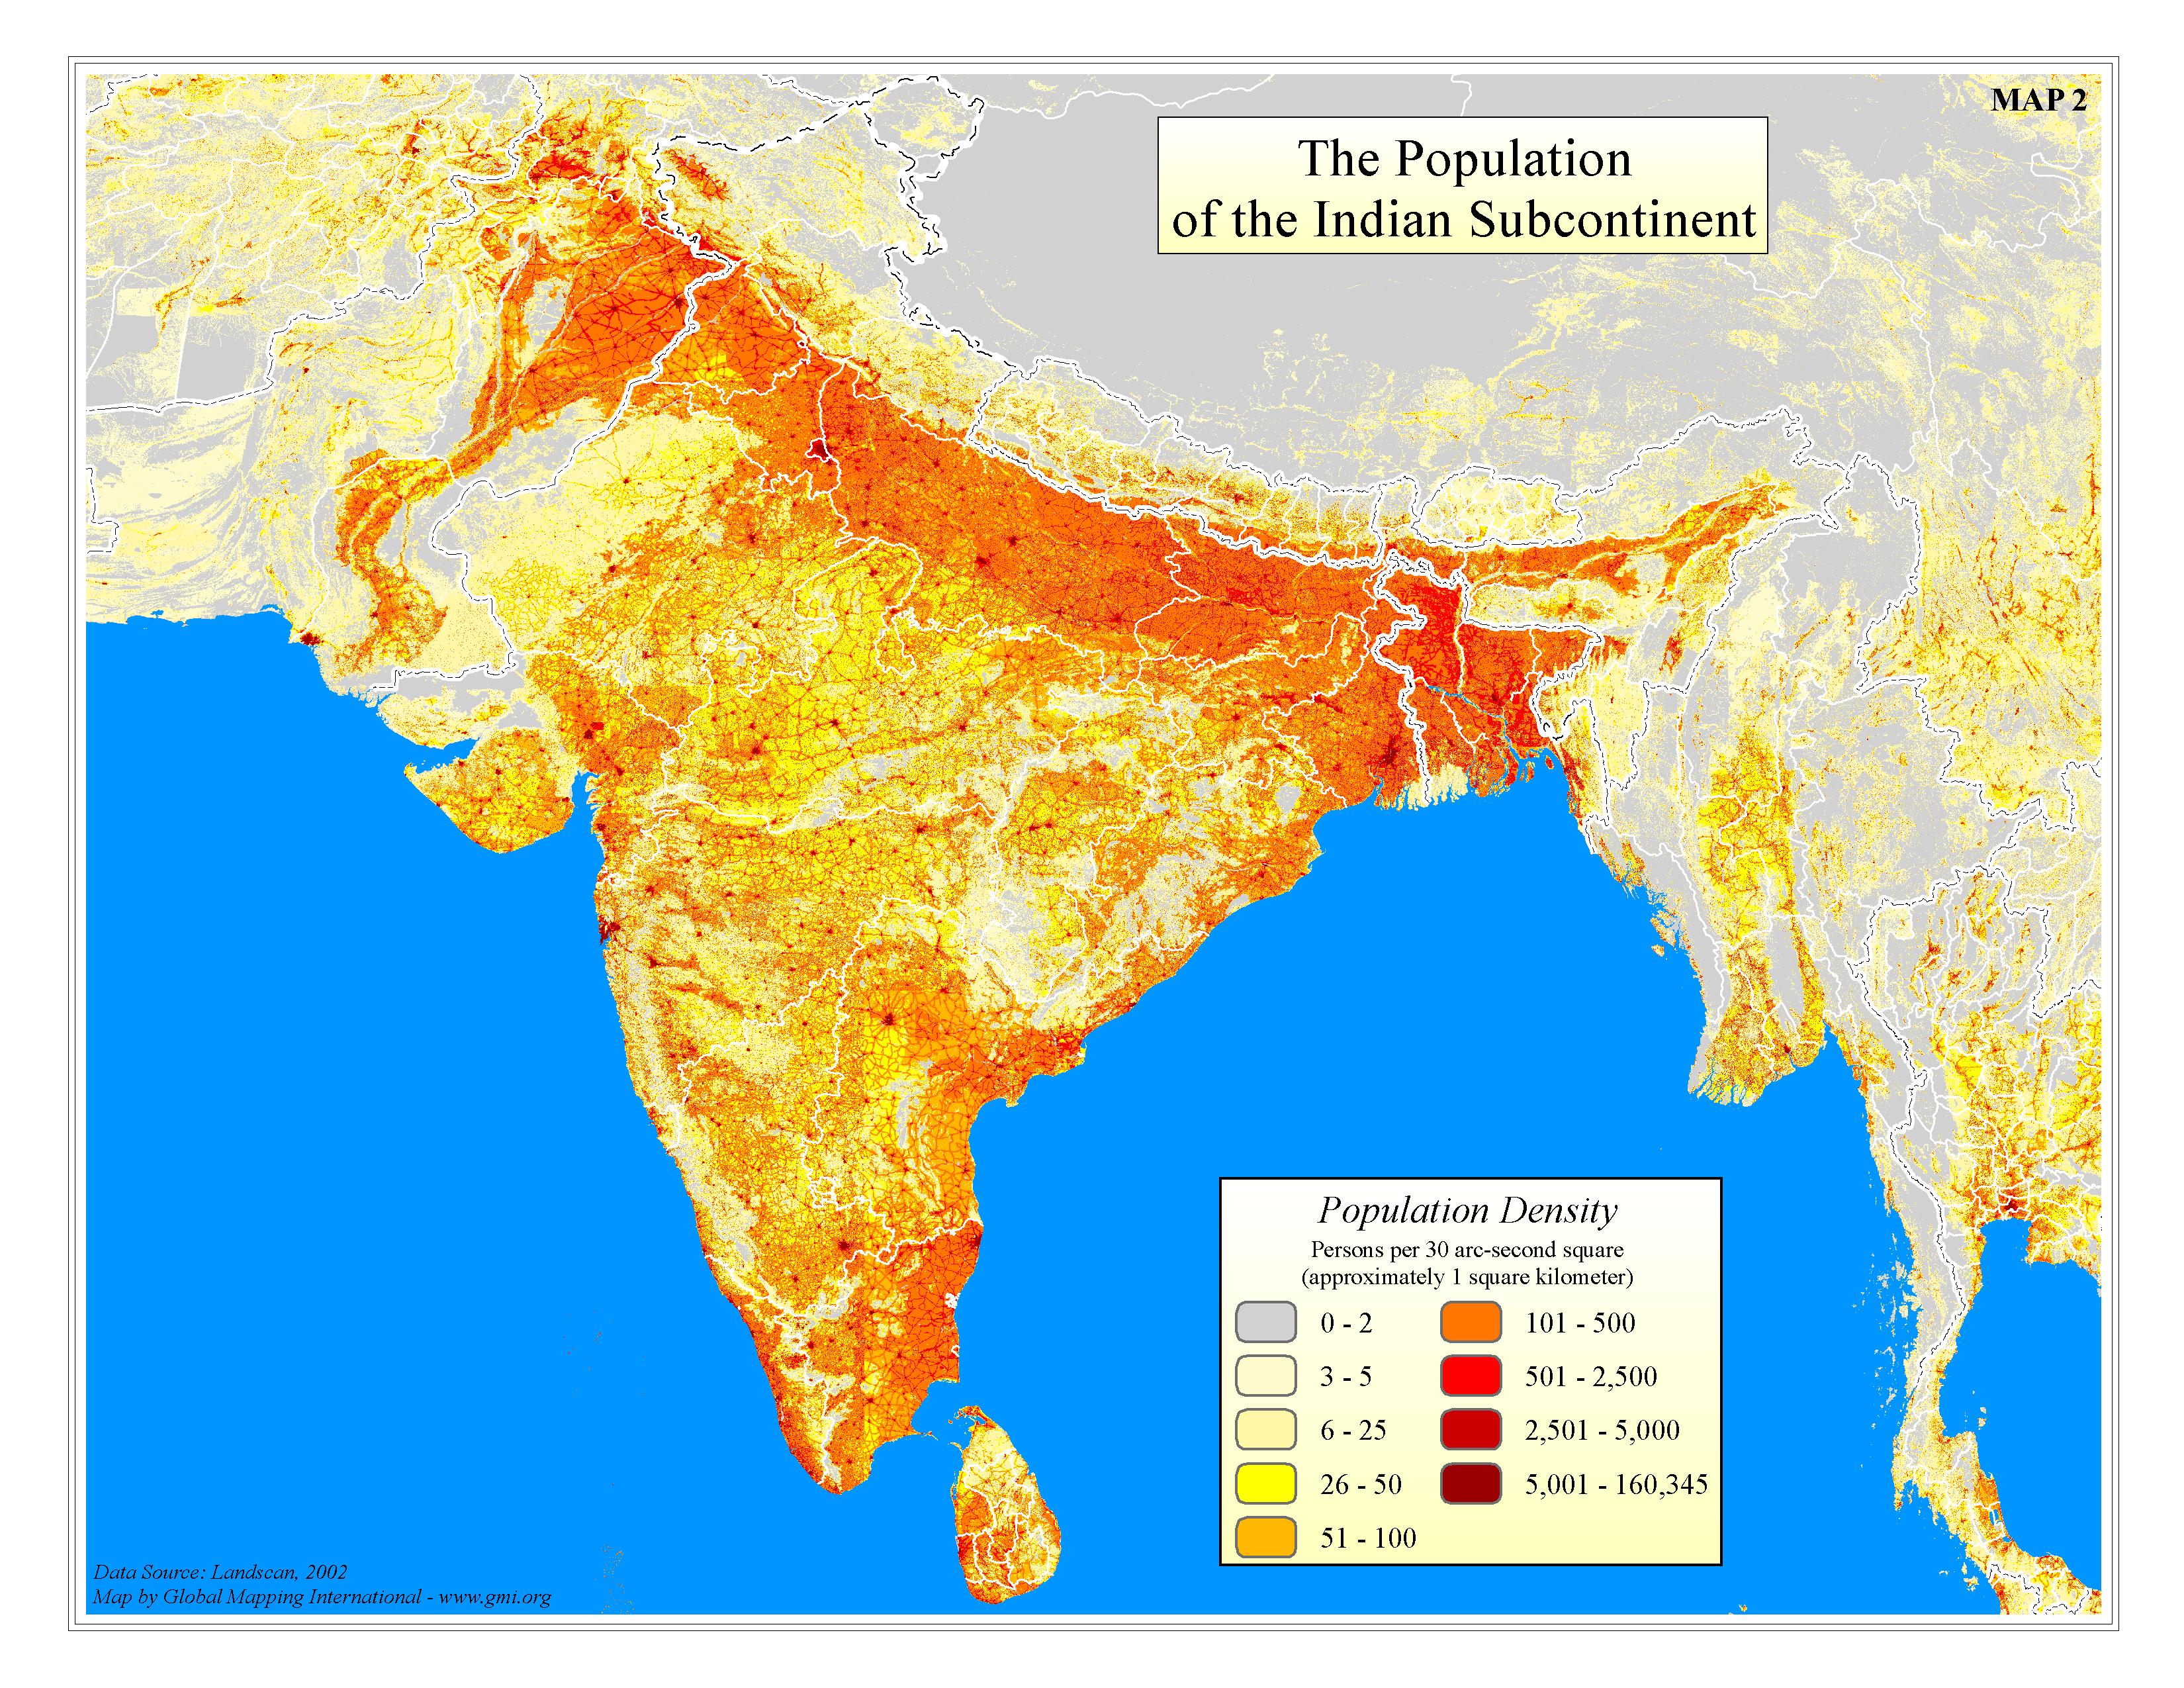 The Population of the Indian Subcontinent